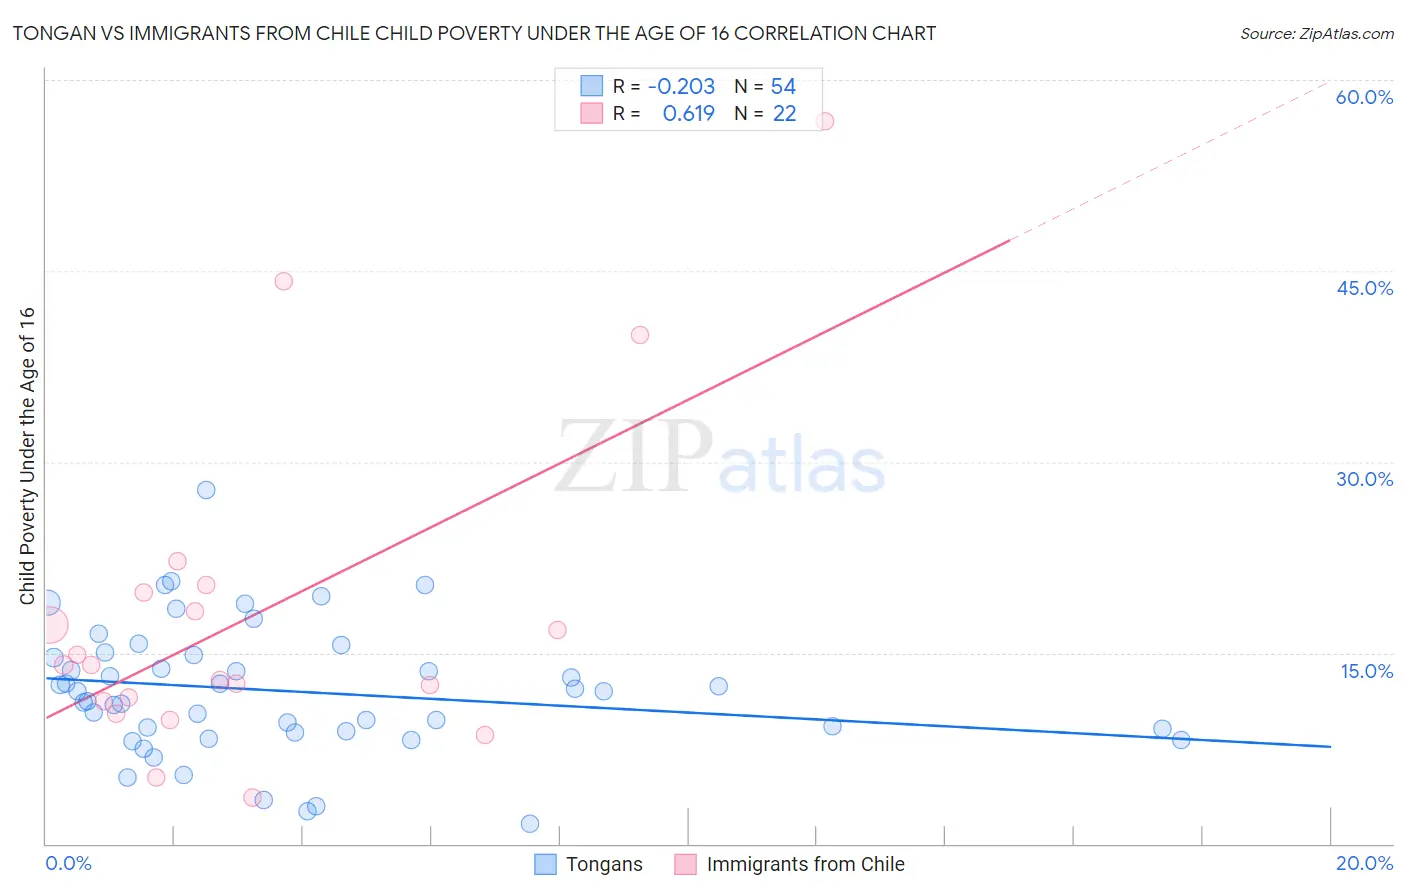 Tongan vs Immigrants from Chile Child Poverty Under the Age of 16